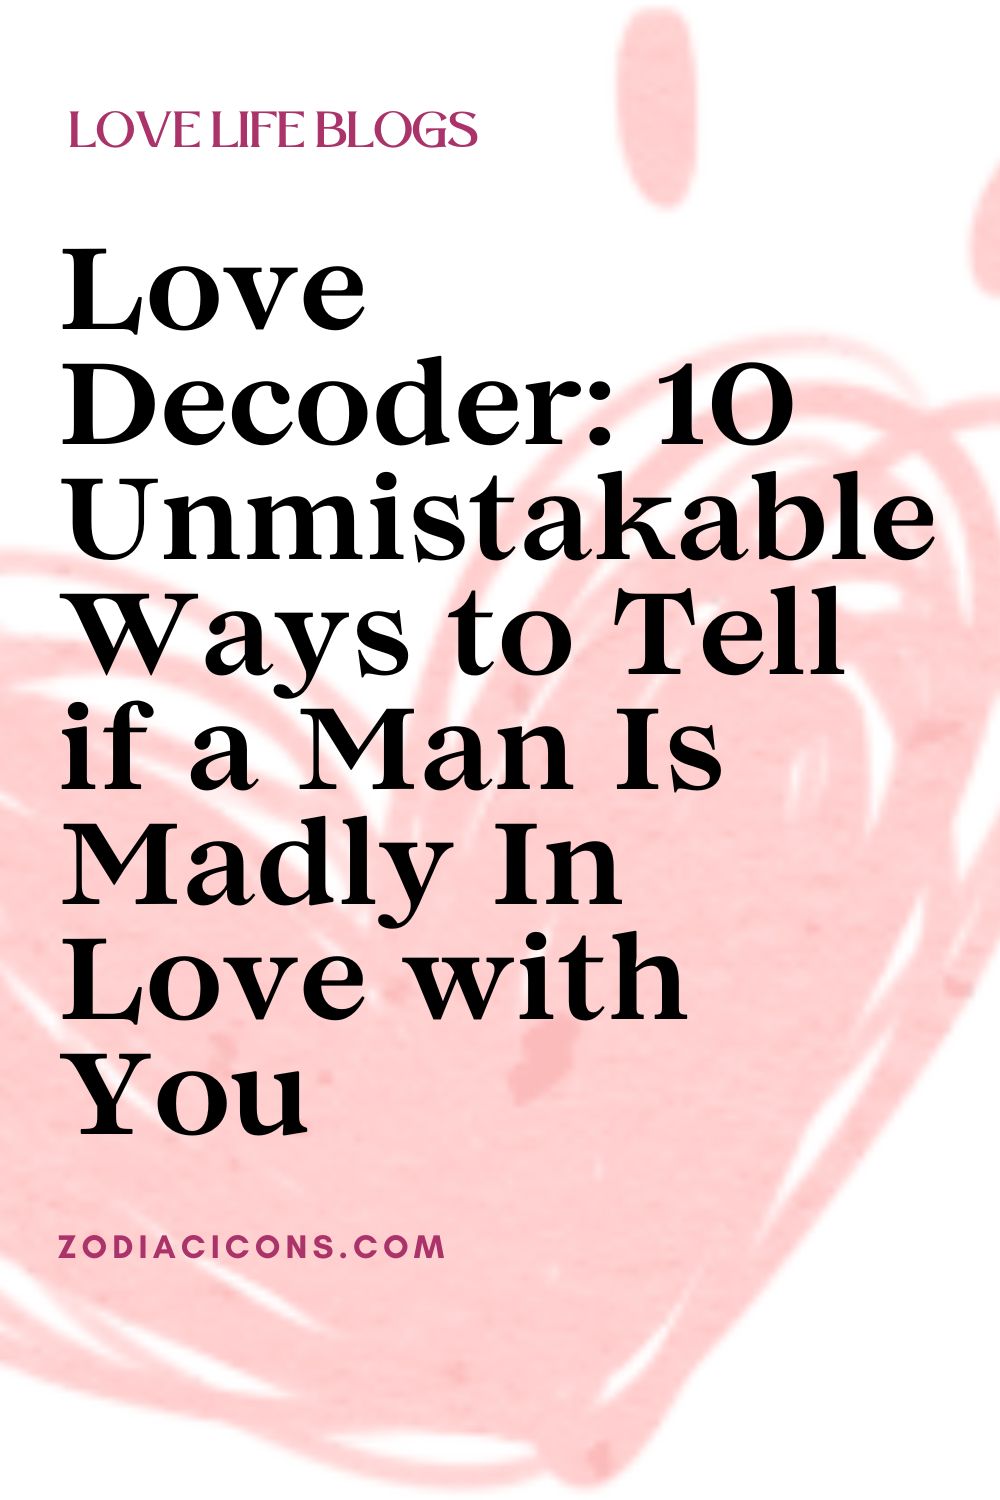 Love Decoder: 10 Unmistakable Ways to Tell if a Man Is Madly In Love with You